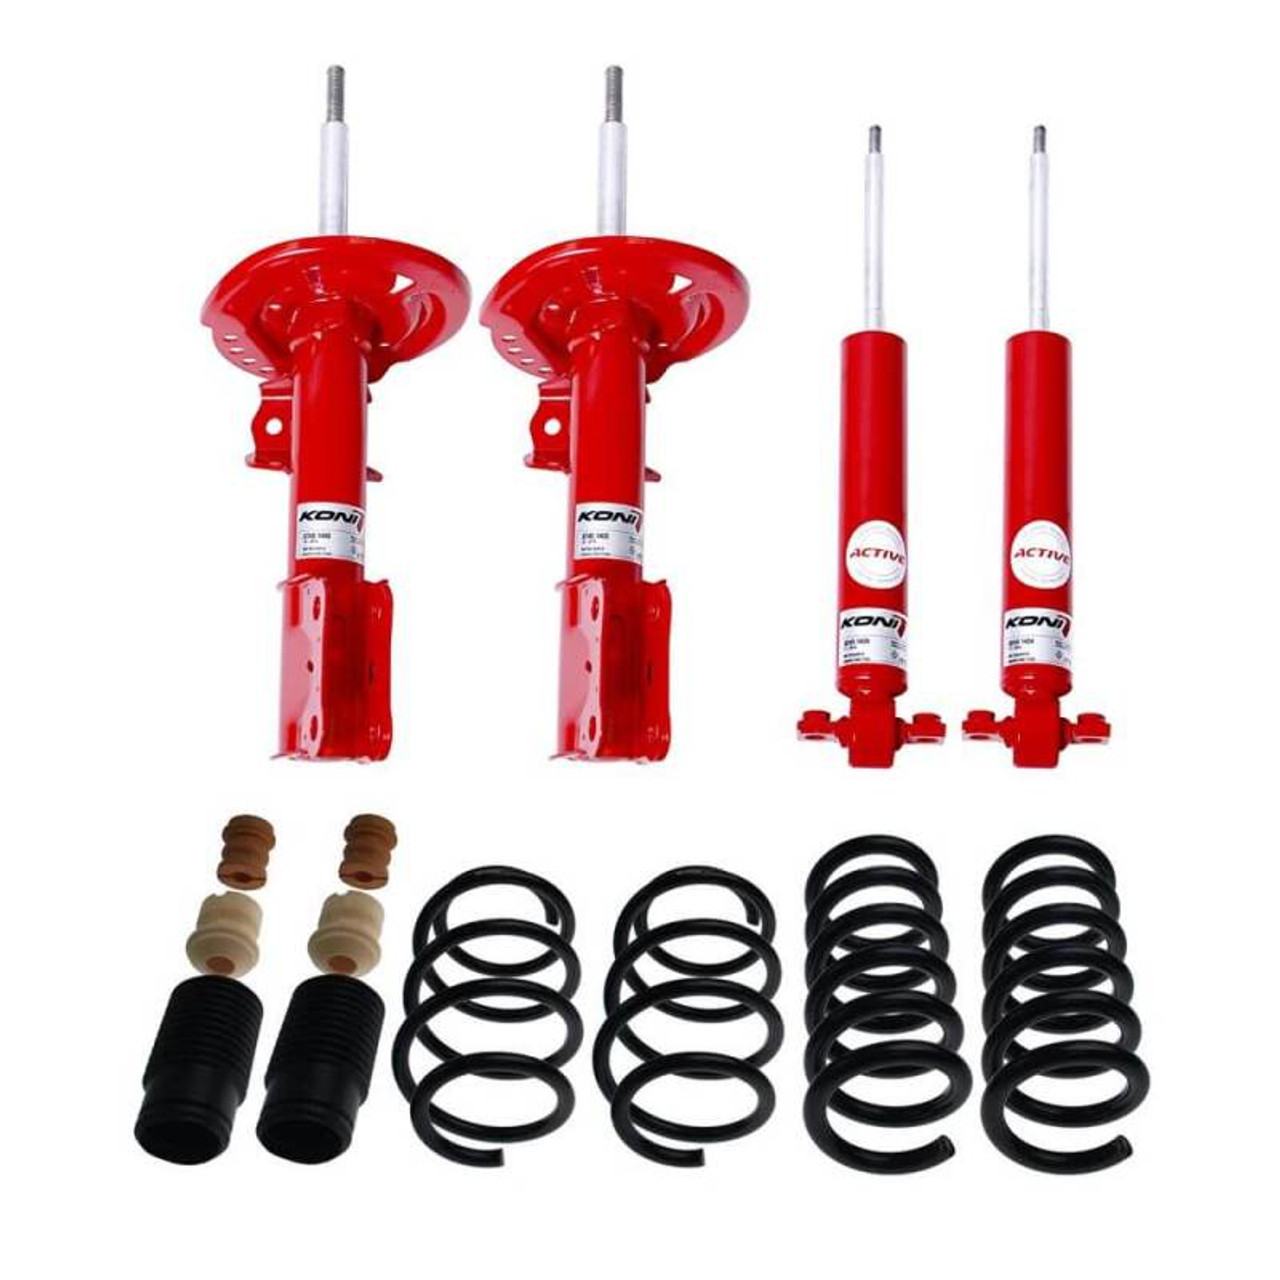 Koni Special Active Shock Kit 05-10 Mustang GT / 2010 Mustang V6 - 1165 1091 Photo - Primary